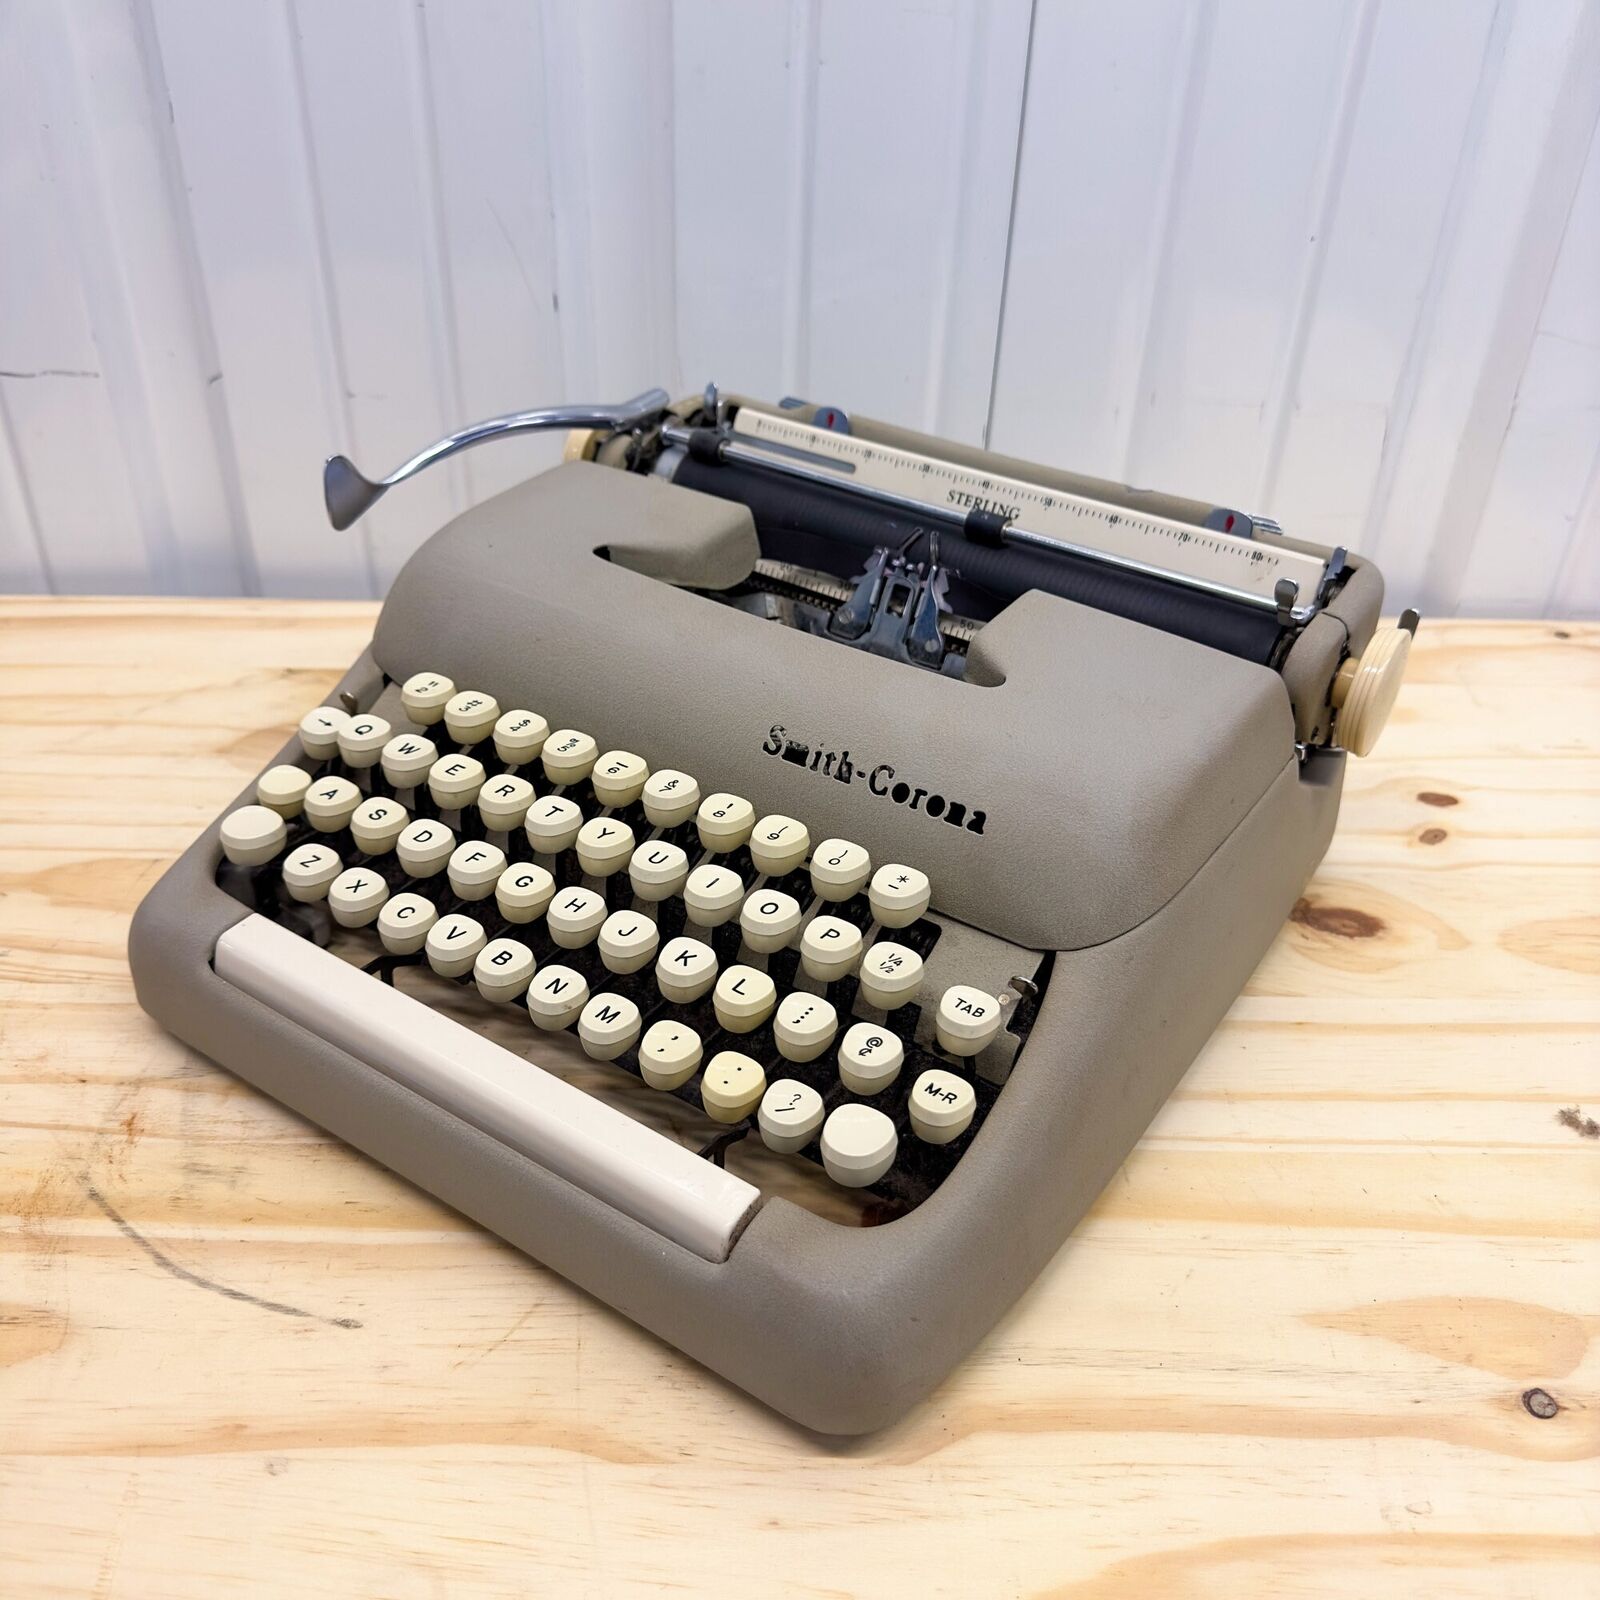 1940s Smith Corona Super Sterling Portable Typewriter in Working Condition With